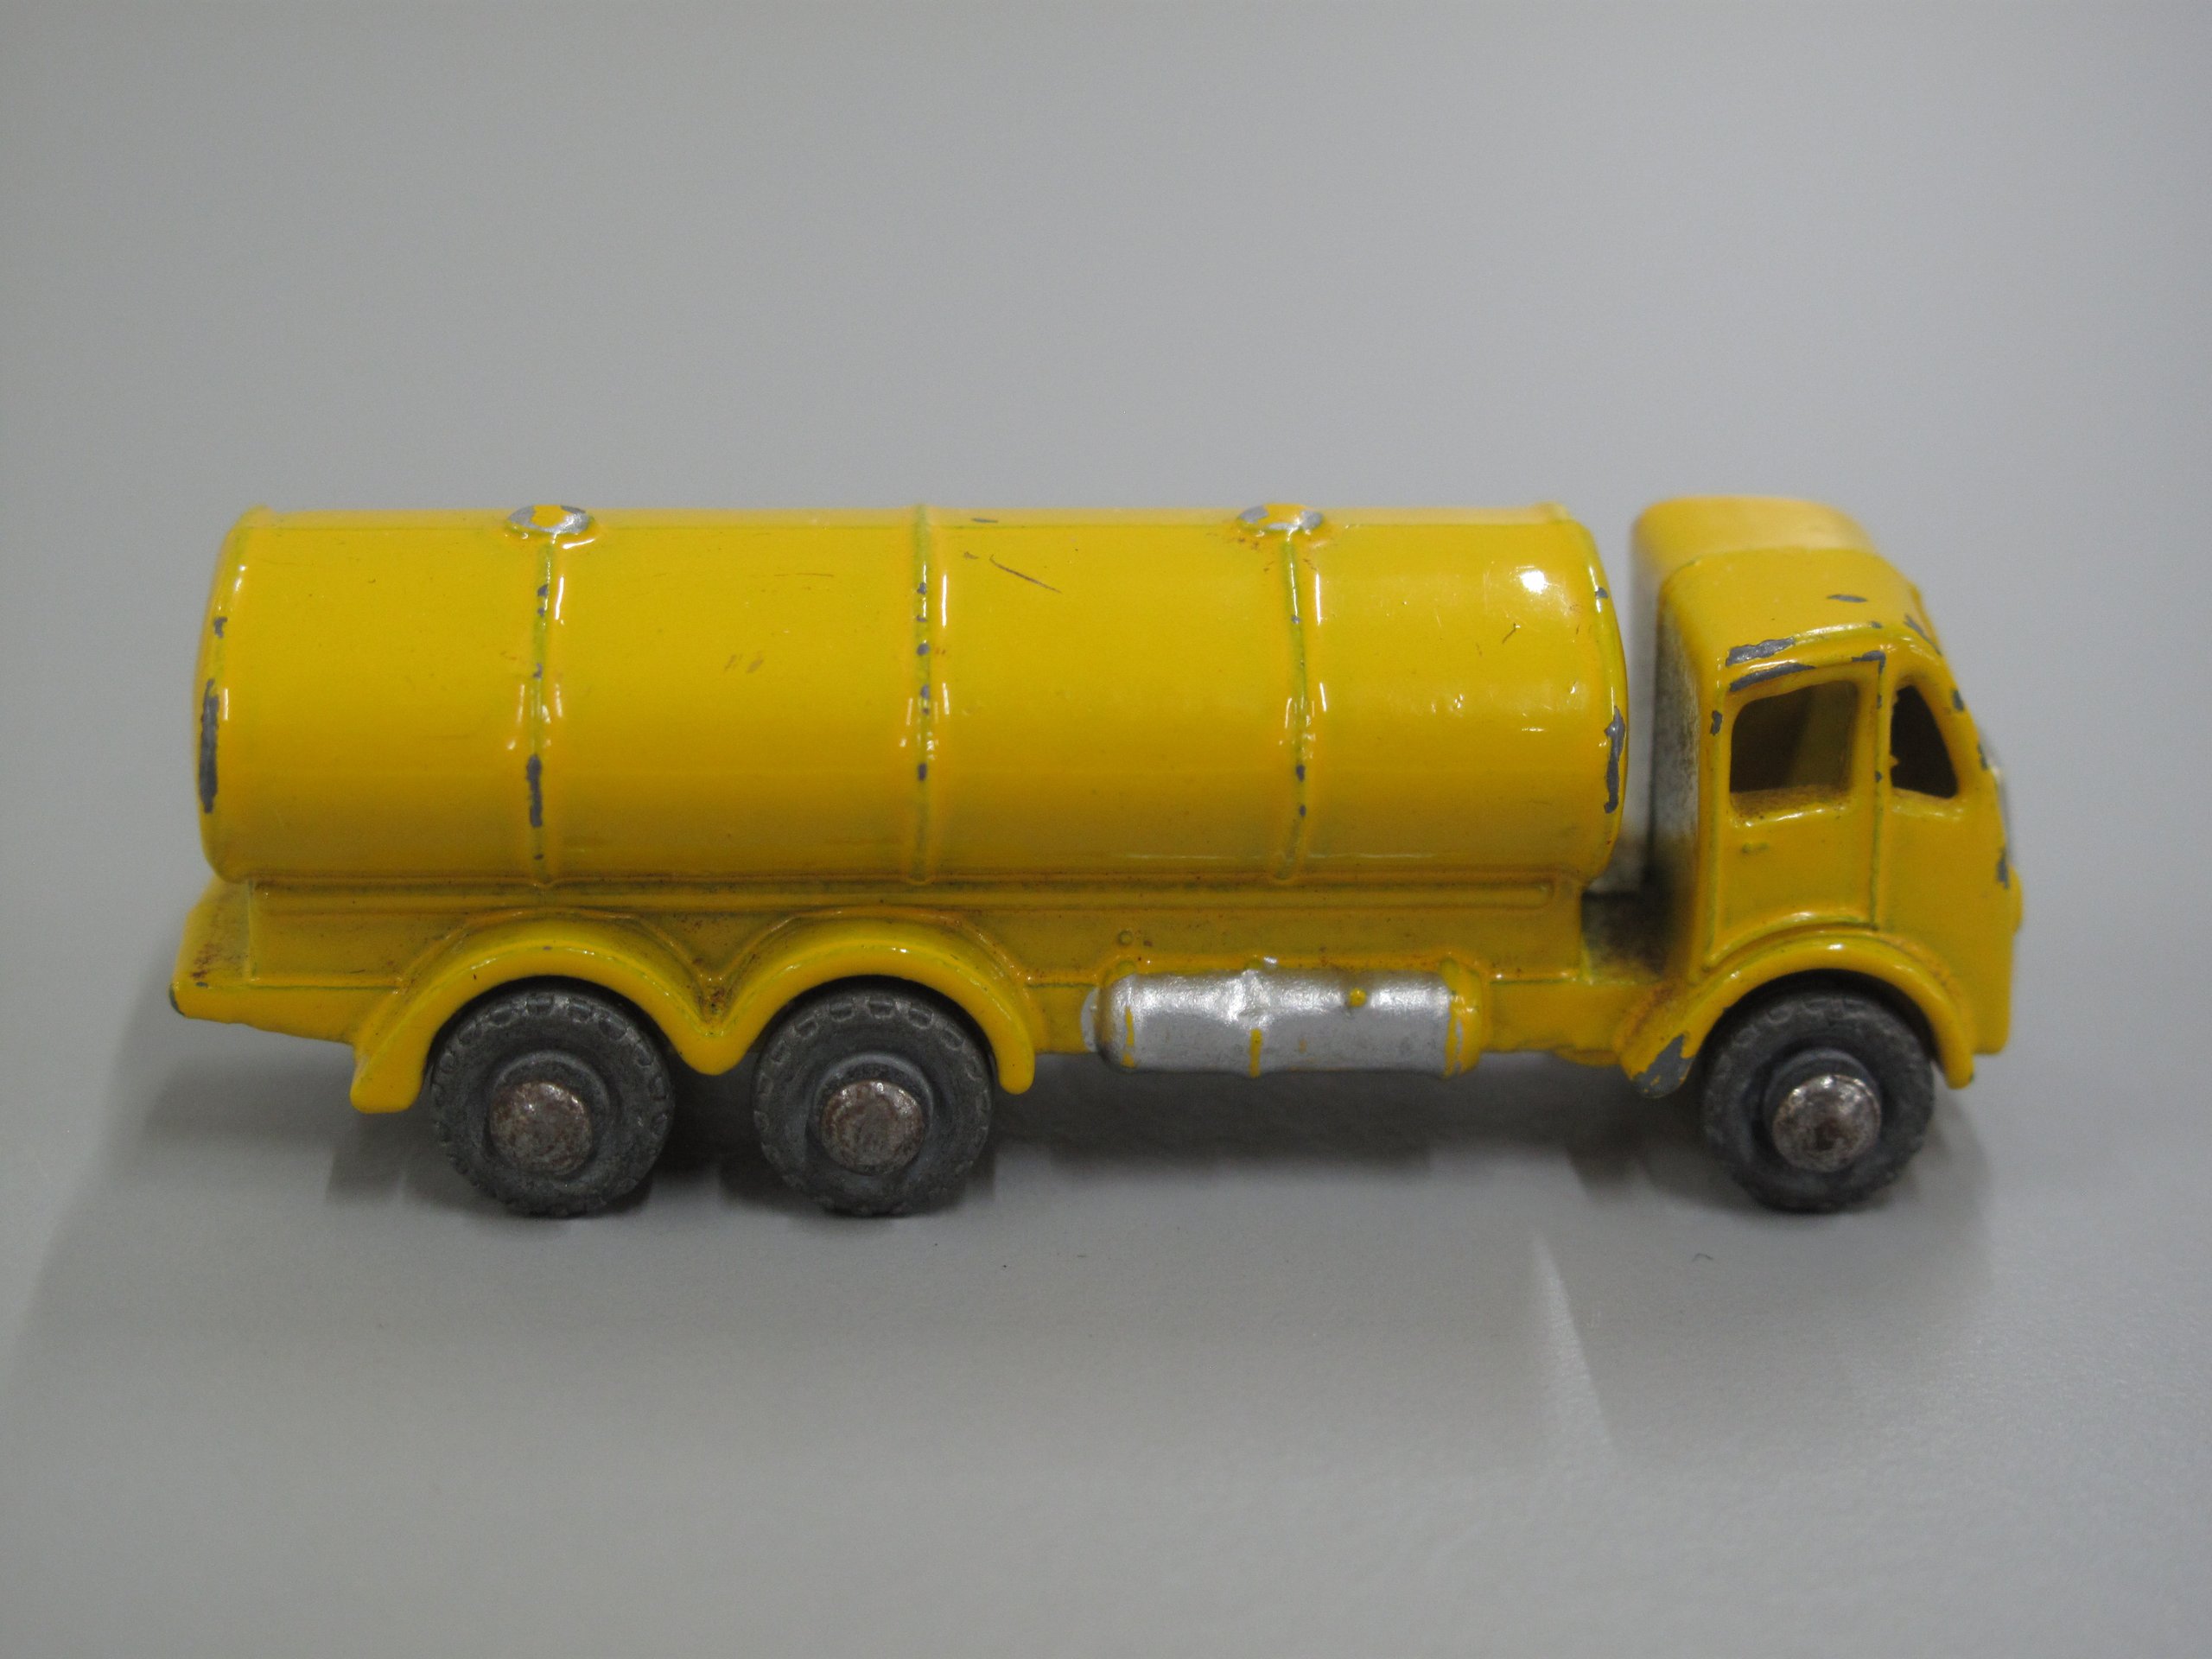 Toy matchbox ERF petrol tanker truck made by Lesney